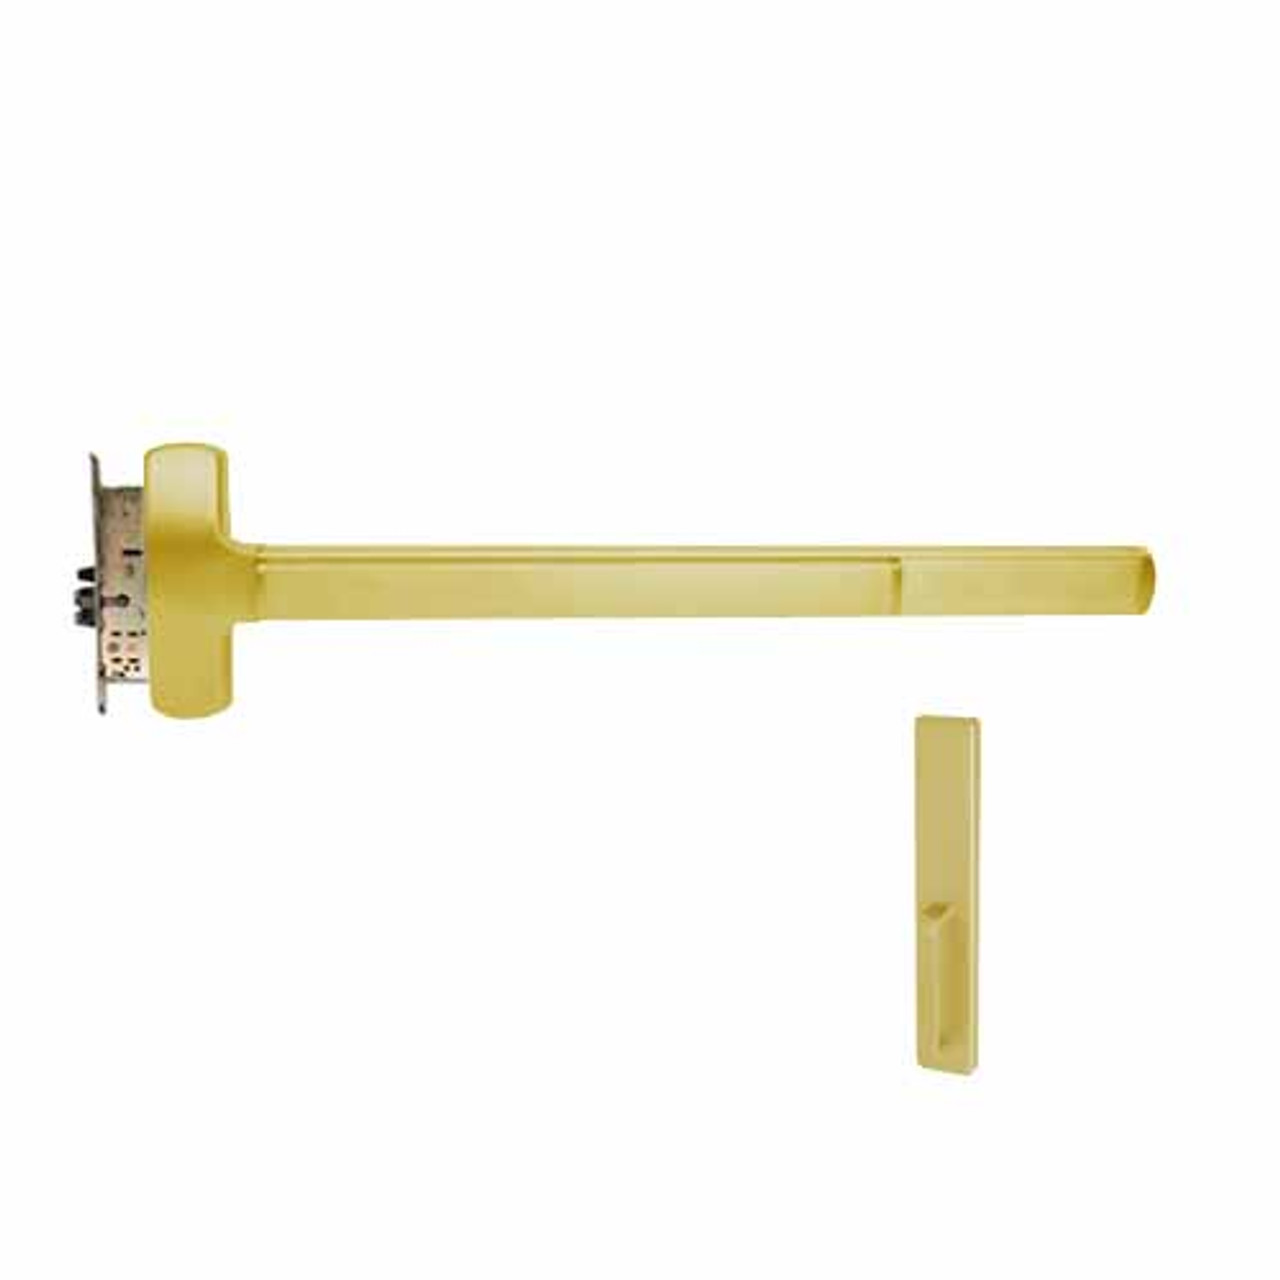 F-25-M-DT-US4-3-LHR Falcon Exit Device in Satin Brass